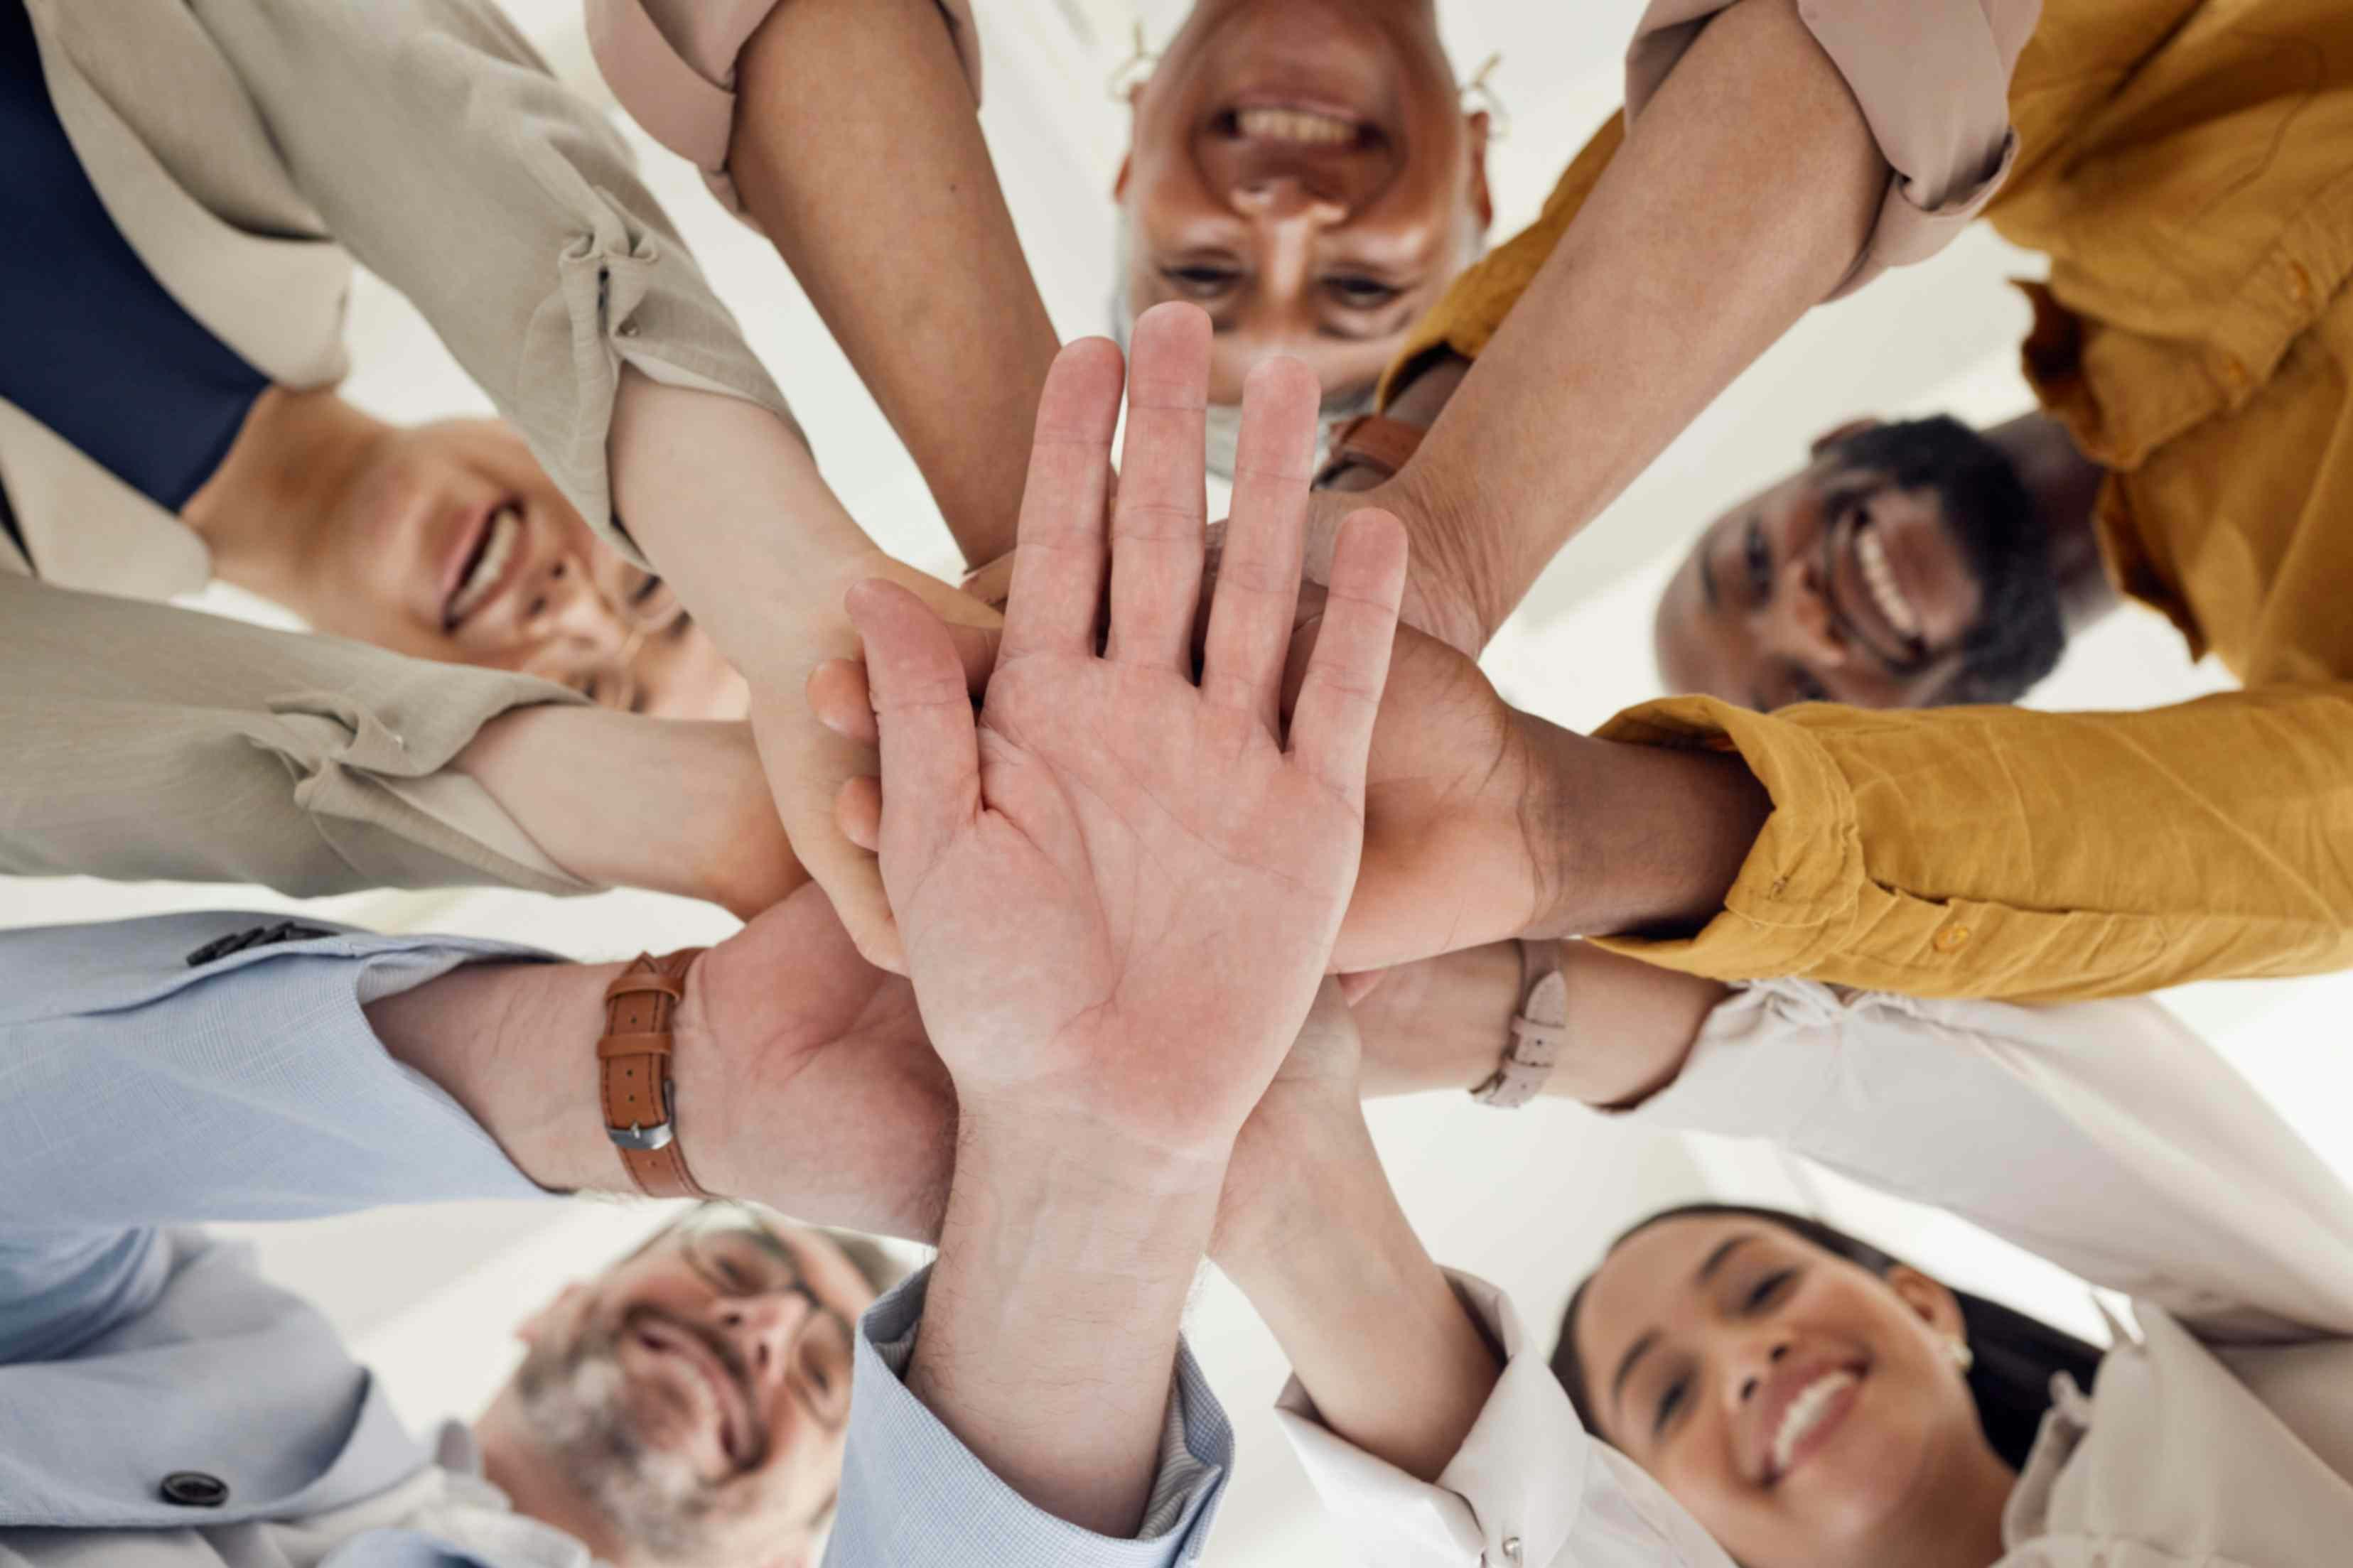 A group of people with hands in the middle smiling